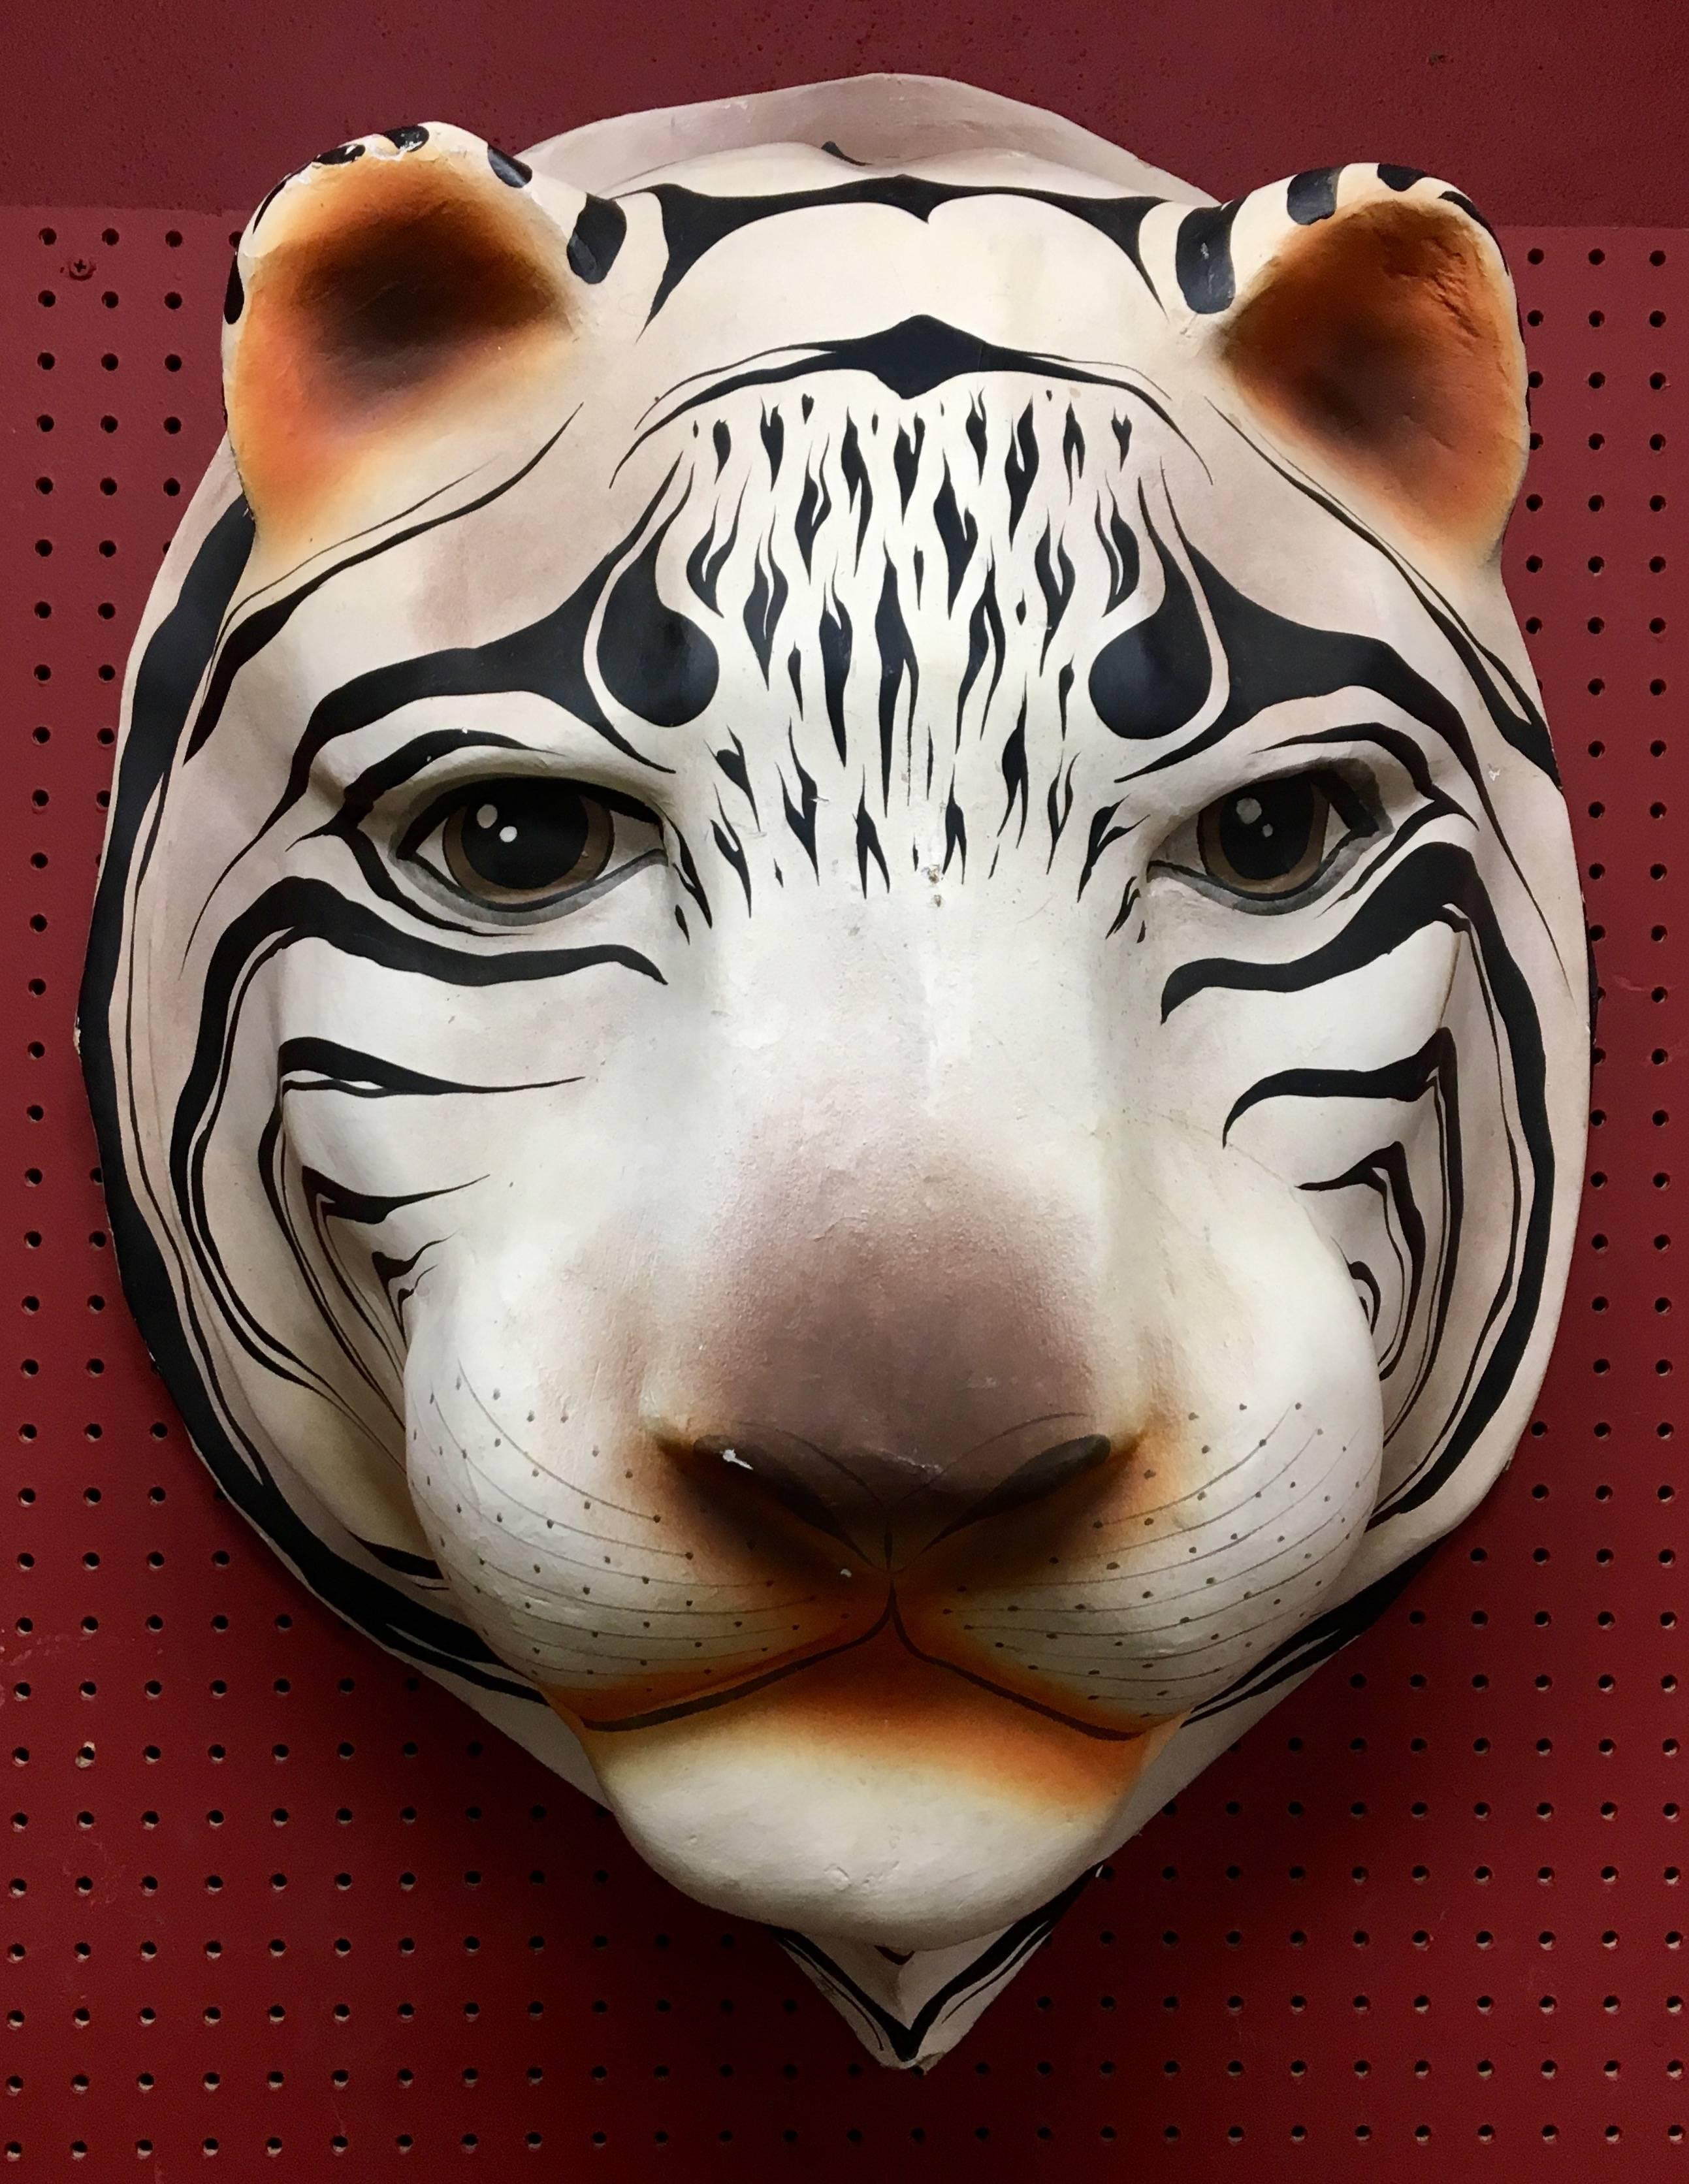 One of a kind piece! Large white Siberian tiger head made of papier mâché and hand-painted. The piece is very realistic looking and is signed by the artist. SB for Sergio Bustamante, circa mid-20th century. Statement piece for any room!